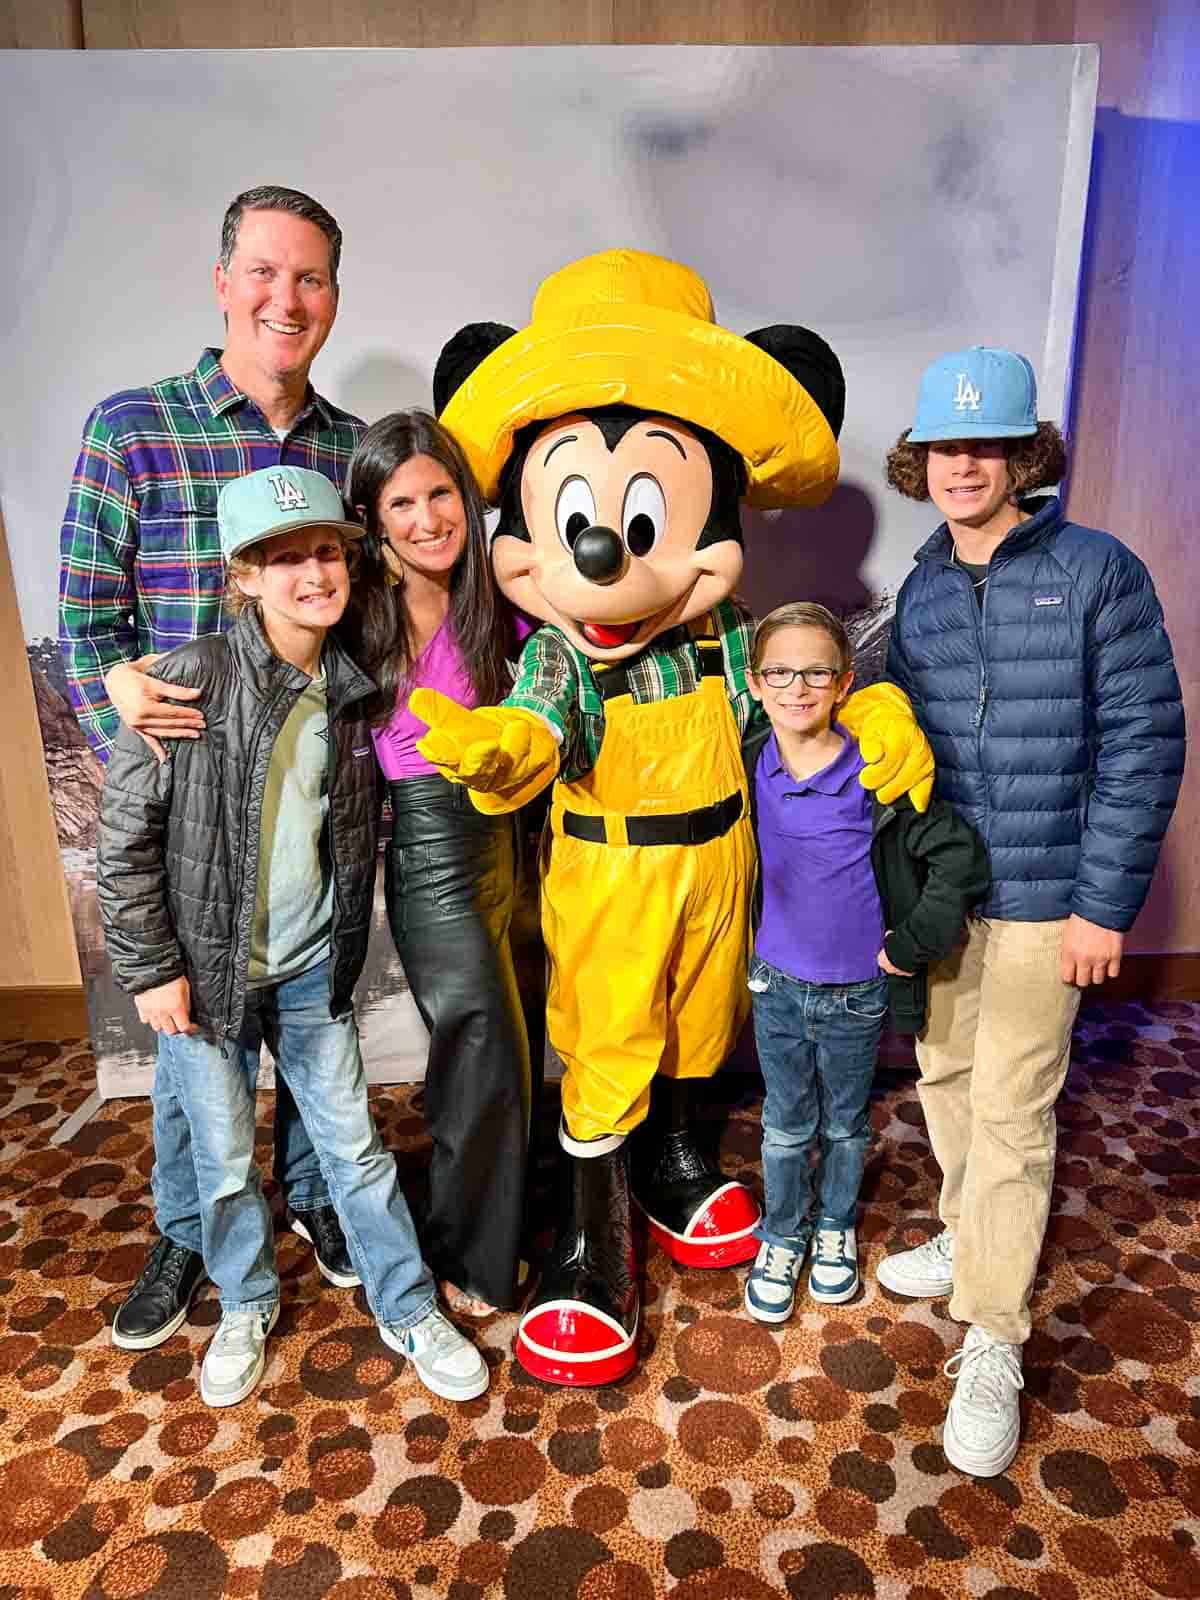 A family of five standing in a room around a live Mickey Mouse character dressed in a yellow hat and fisherman pants taking a photo.